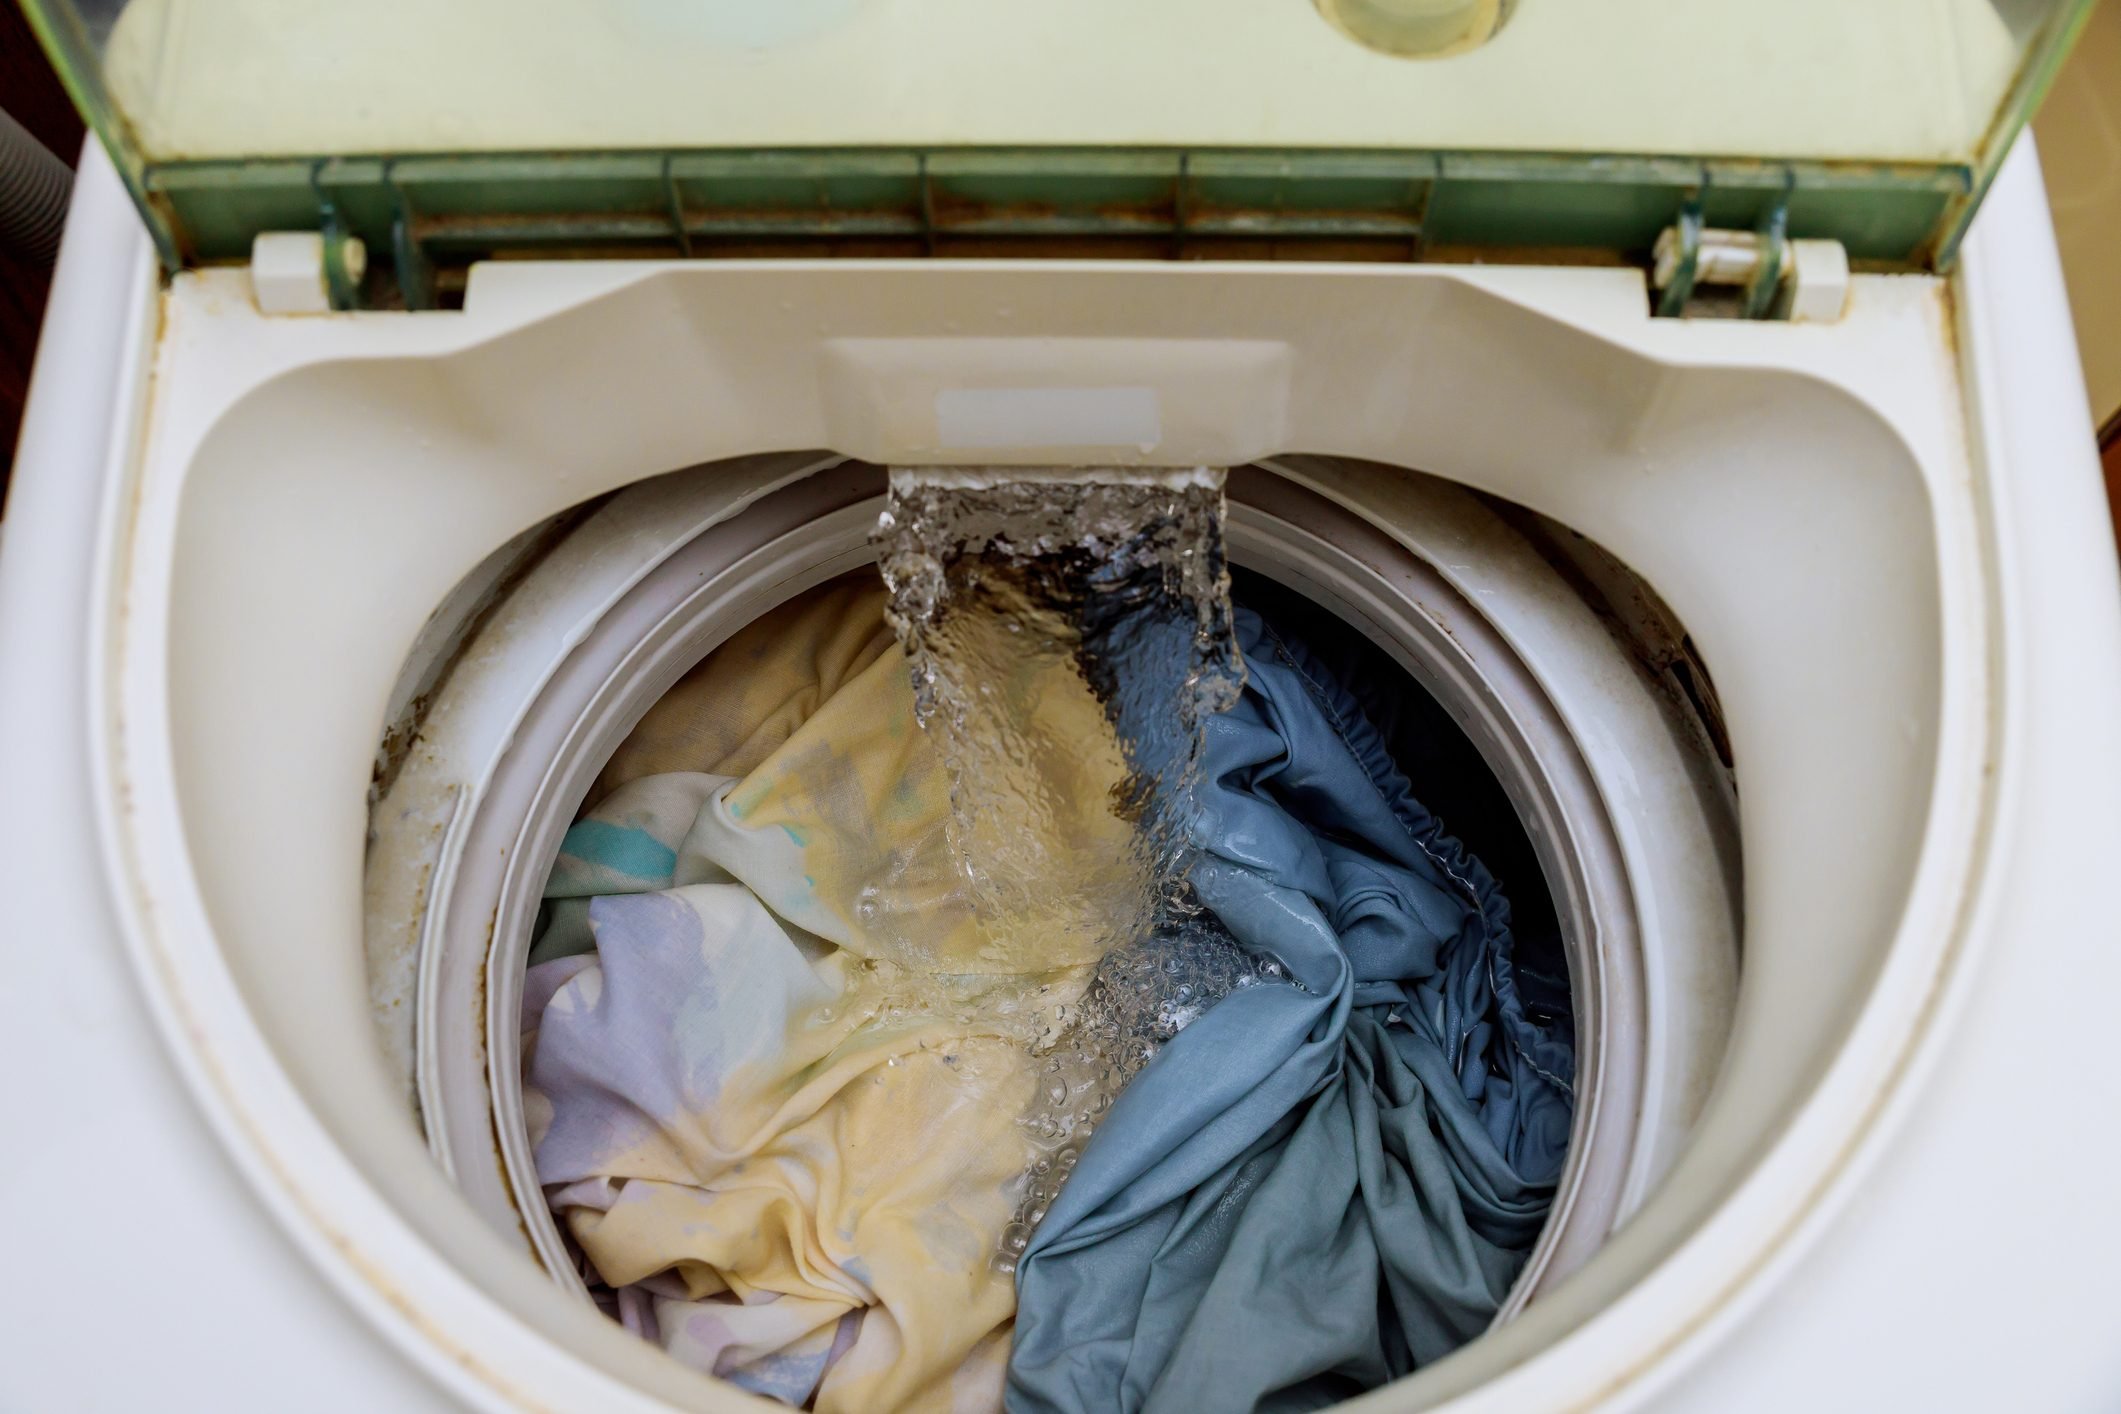 Deep Clean Your Washing Machine With Two Ingredients You Already Have